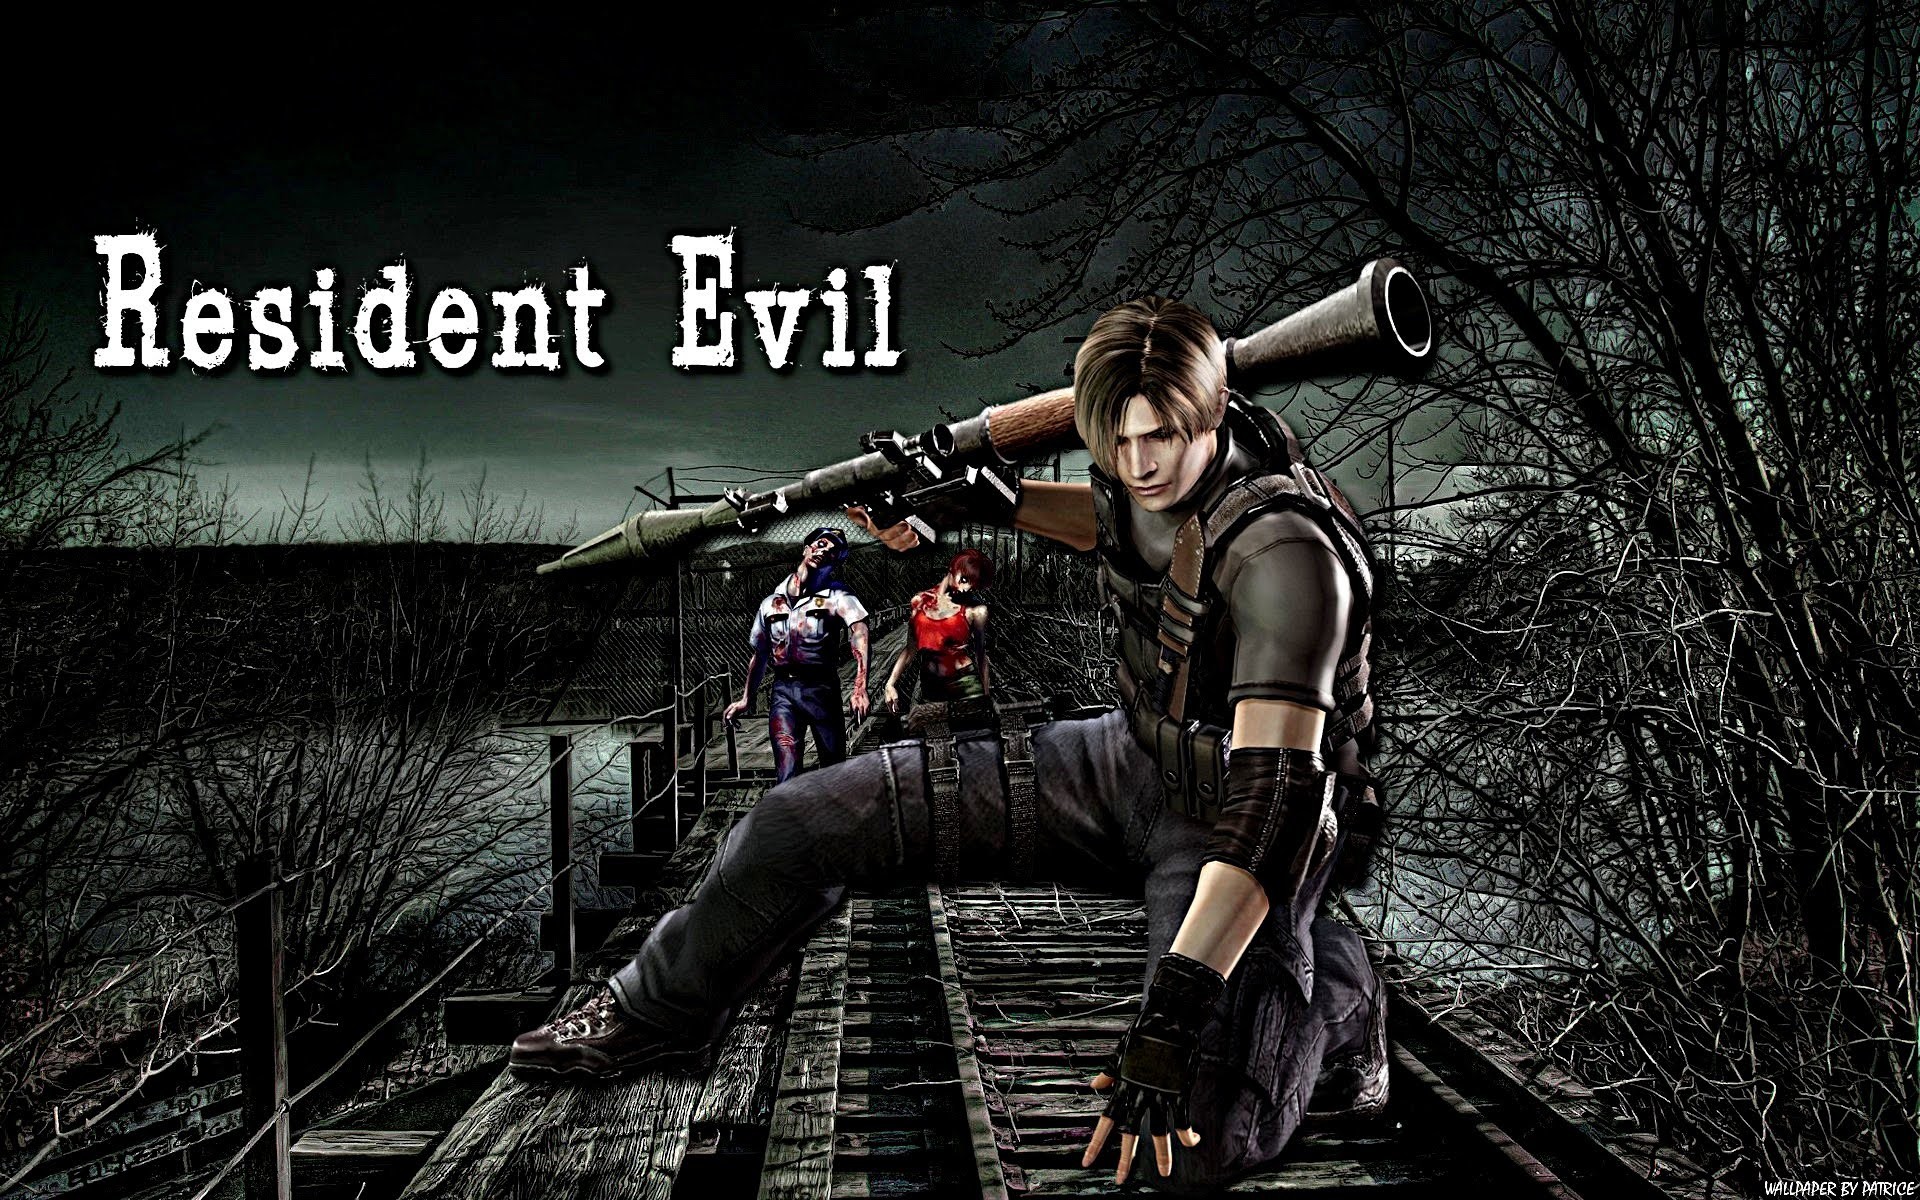 Resident evil images REV D HD wallpaper and background photos 19201200